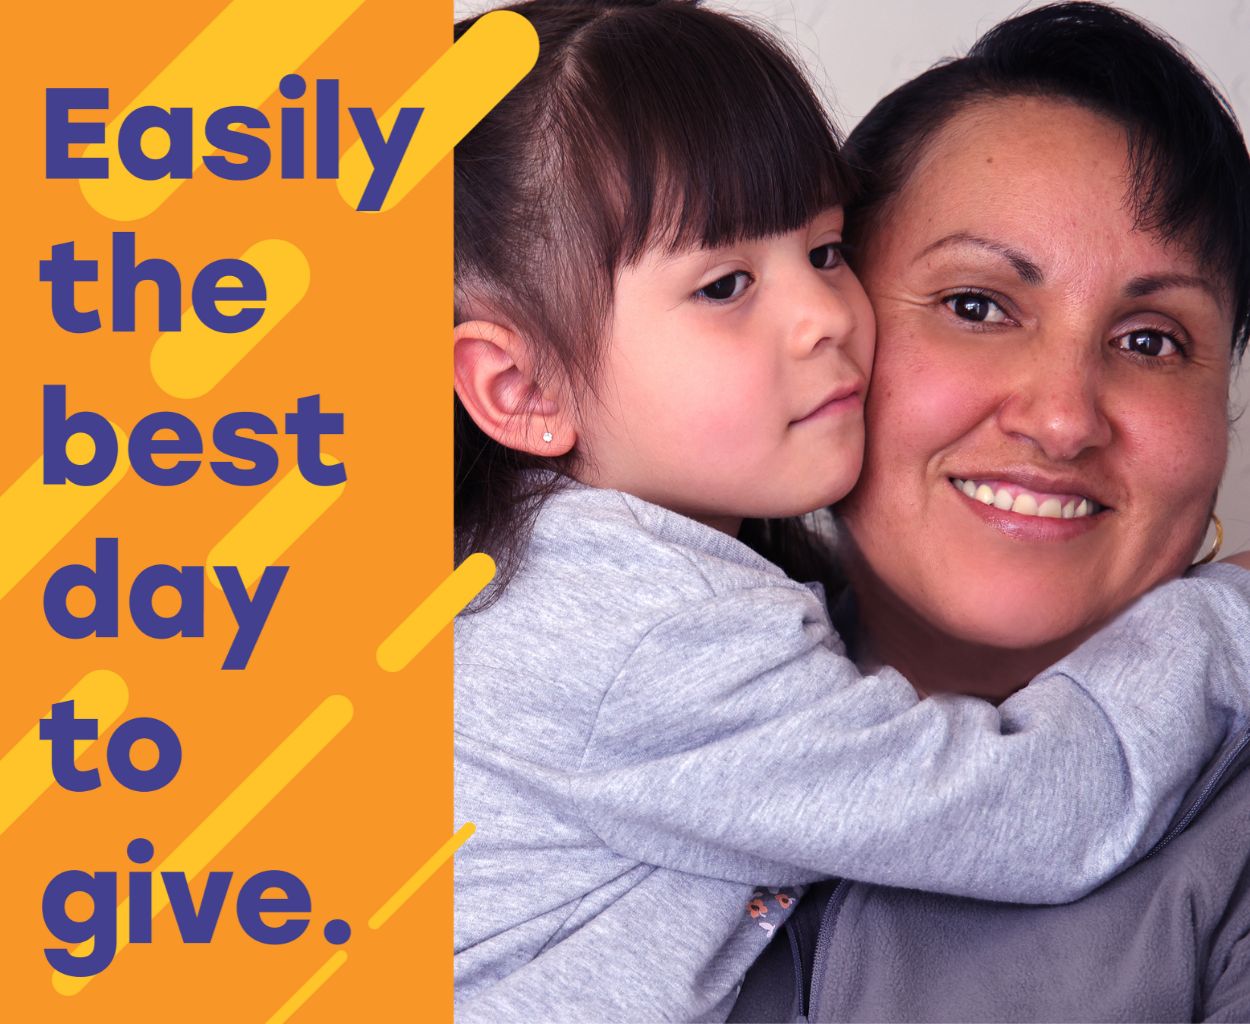 An image of woman and her young daughter with text: "Easily the best day to give."